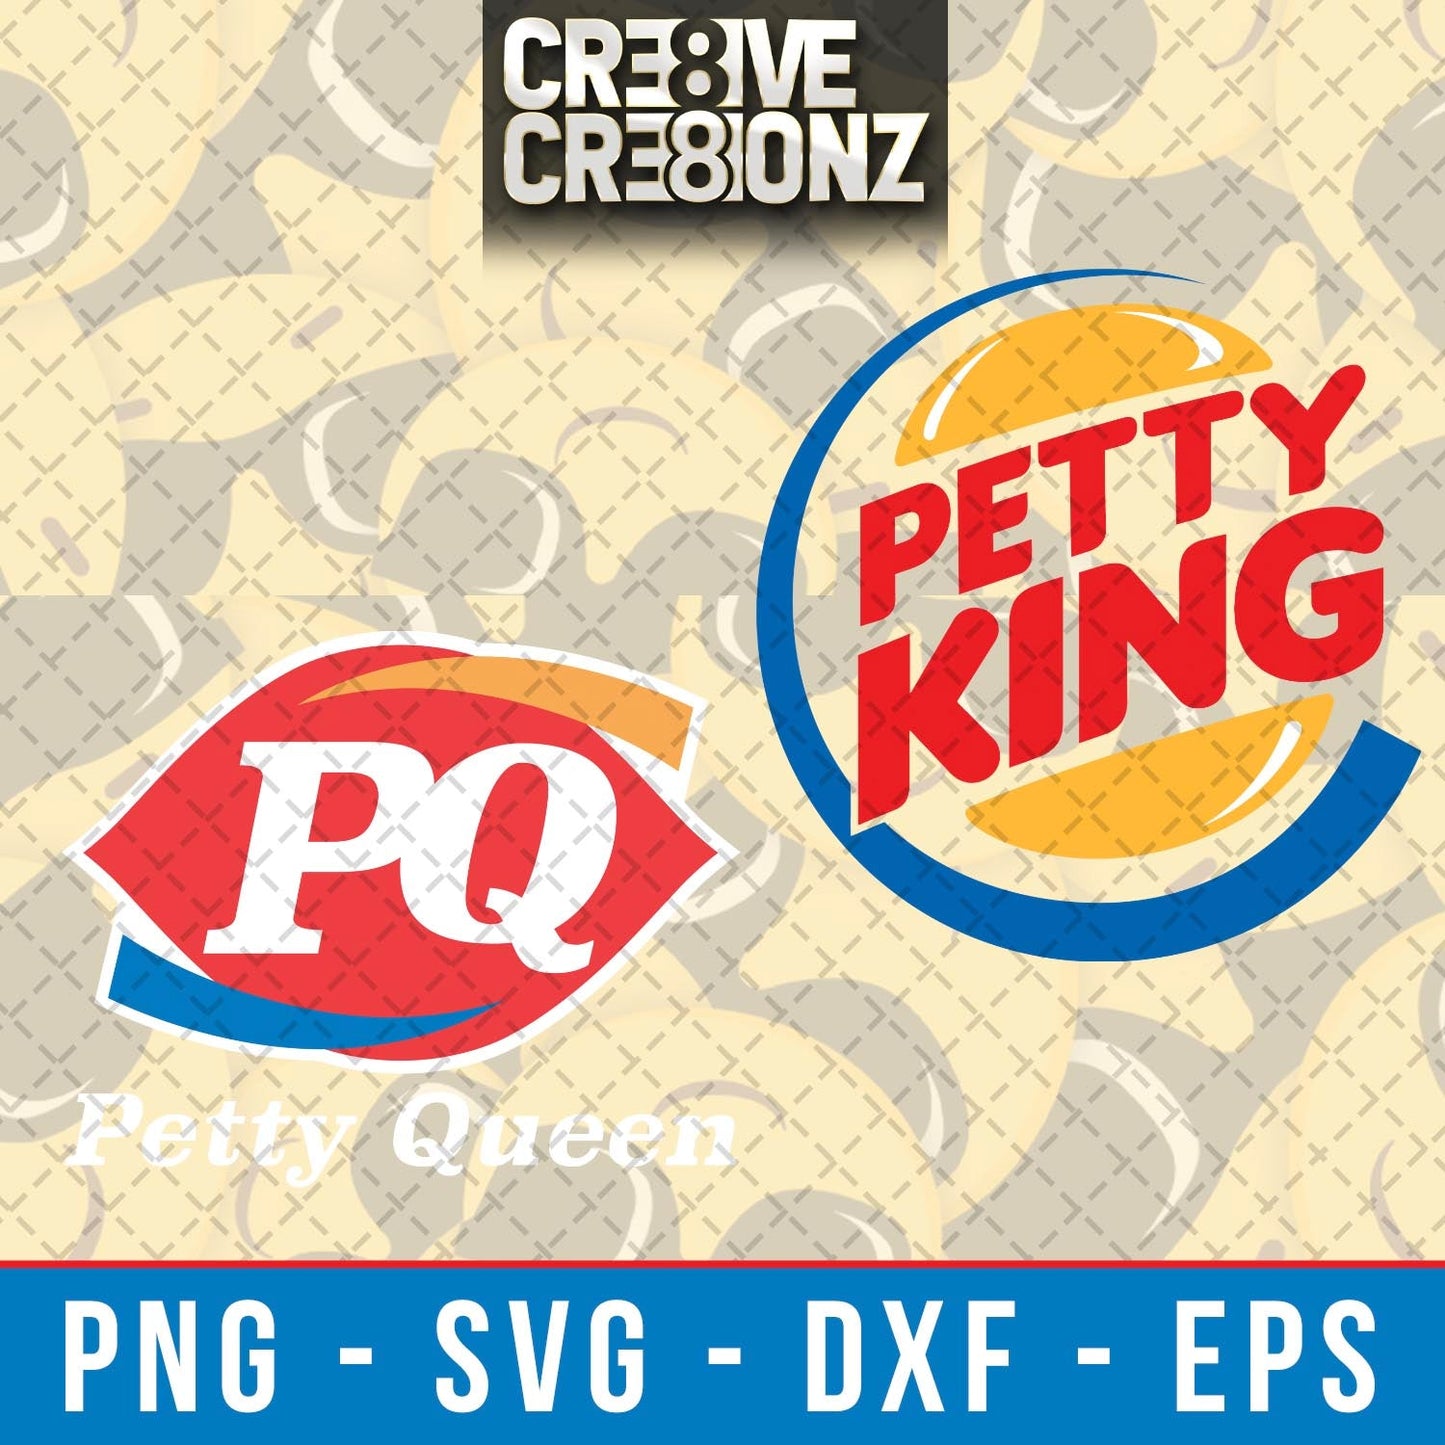 Parody Petty King SVG - Cre8ive Cre8ionz